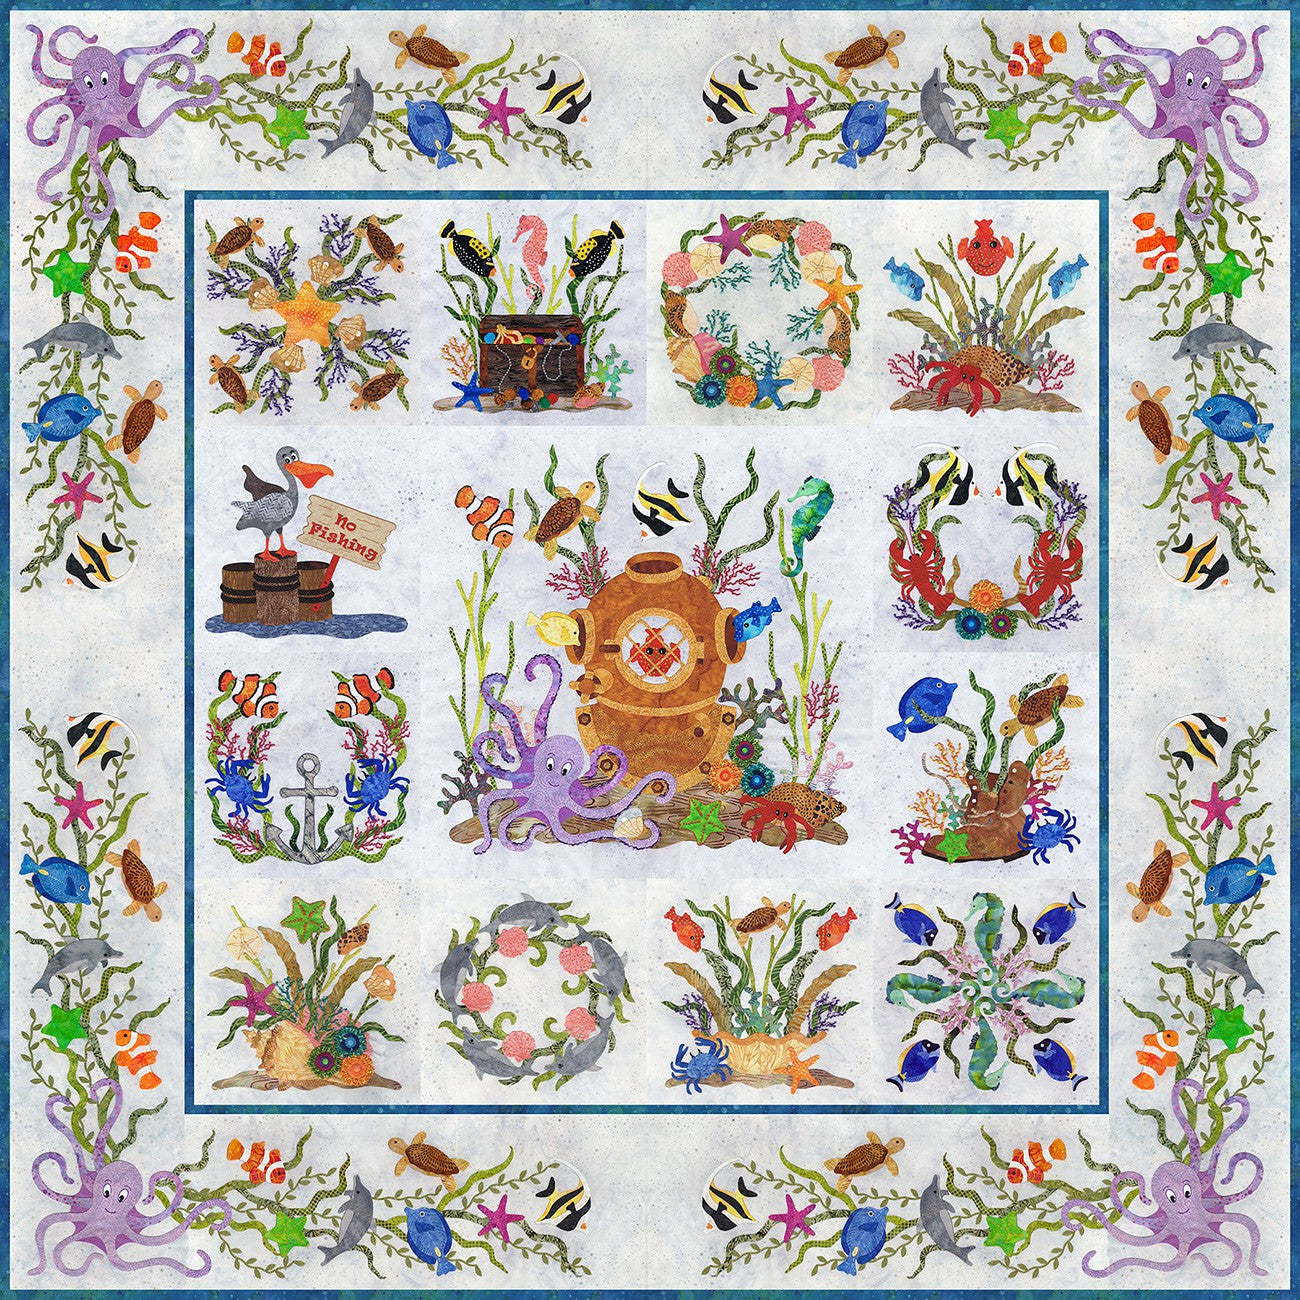 Octopuses Garden Applique Quilt Pattern Set by Pearl P Pereira of P3 Designs